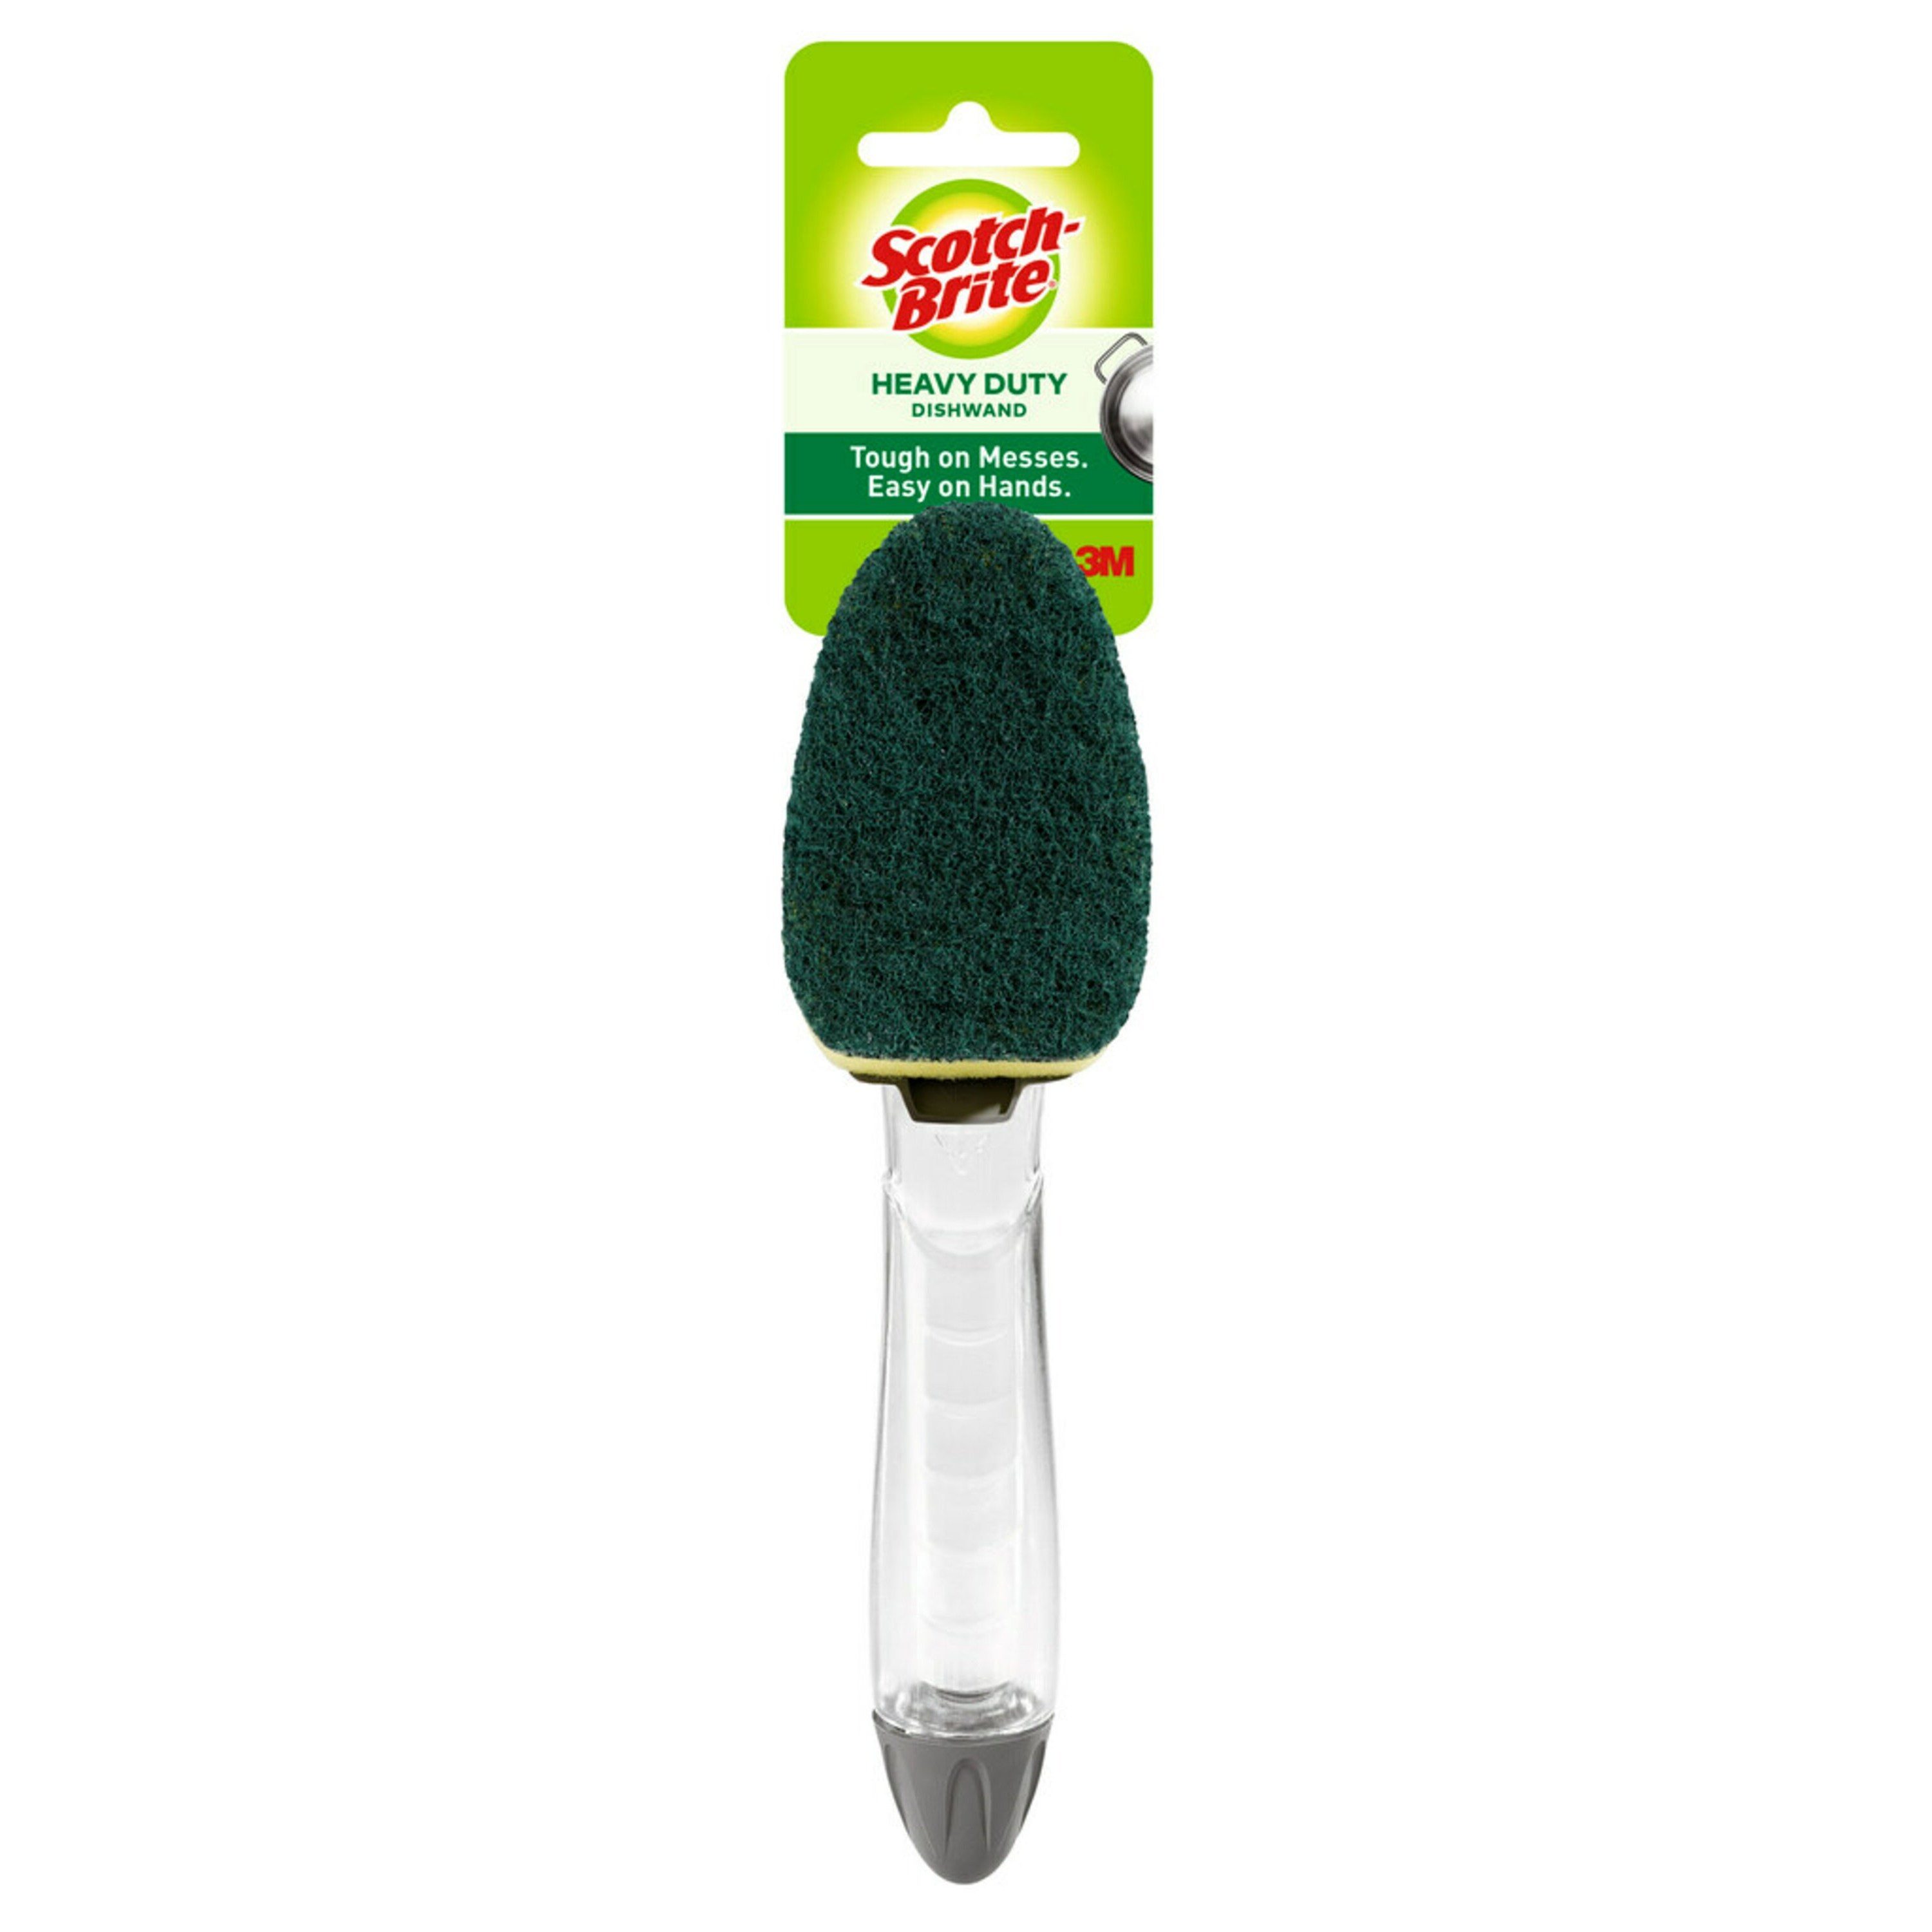 Heavy Duty Dish Sponges Wand, Kitchen Dishes Scrubber Sponge Long Handle Dish Brush, Scrub Sponge for Washing Bowl, Pot, and Sink, Non-Scratch,Green